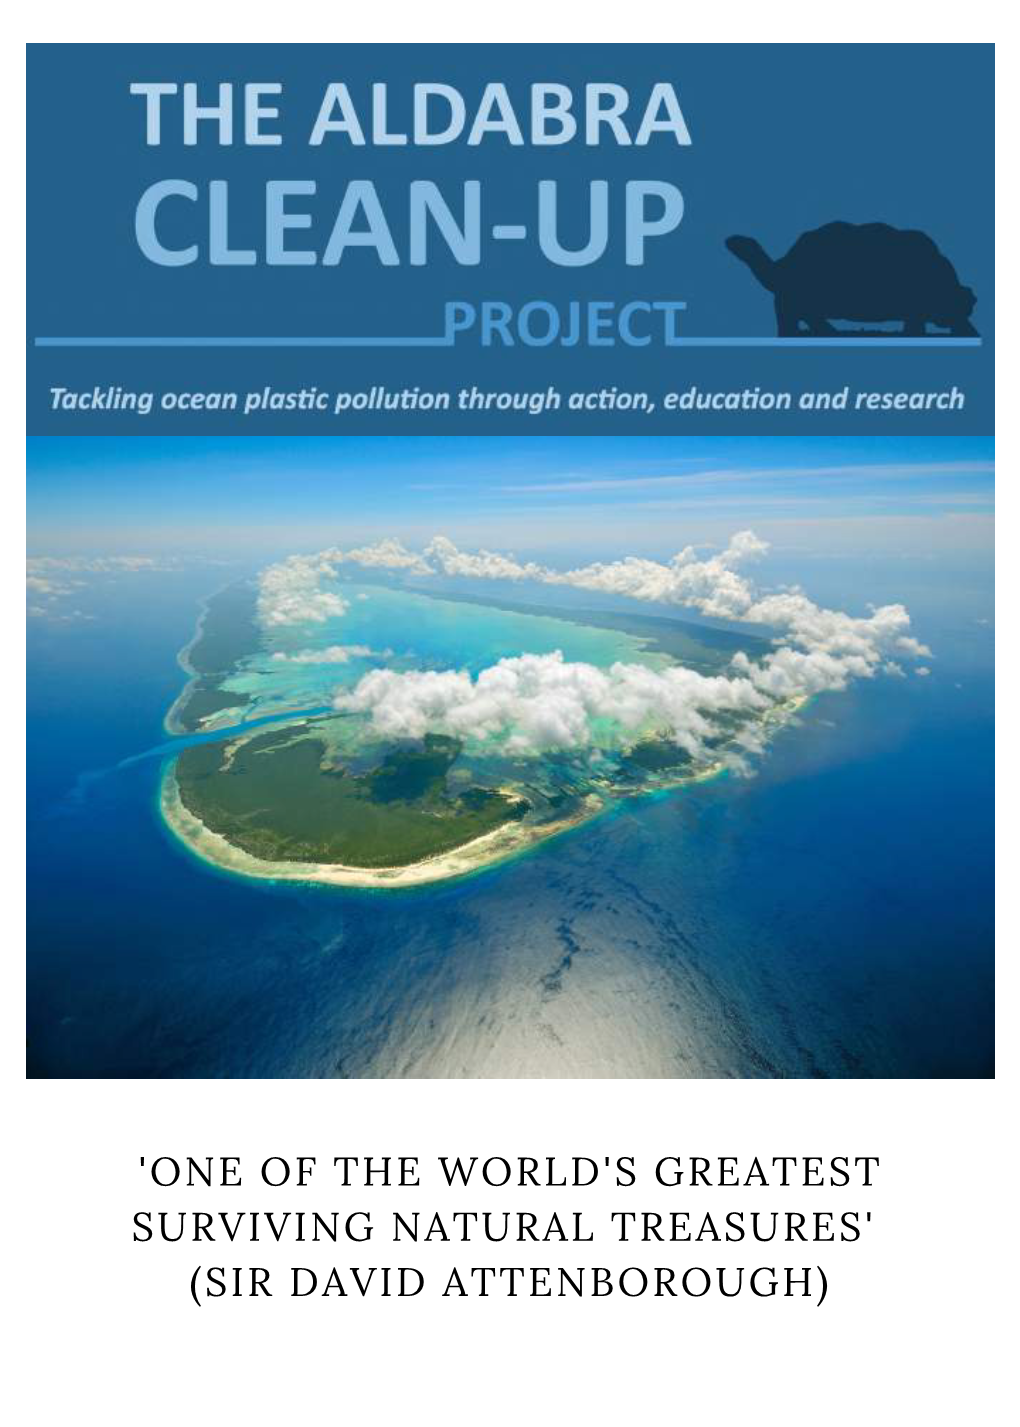 Aldabra Clean up Project! Sponsors of the Project! Project